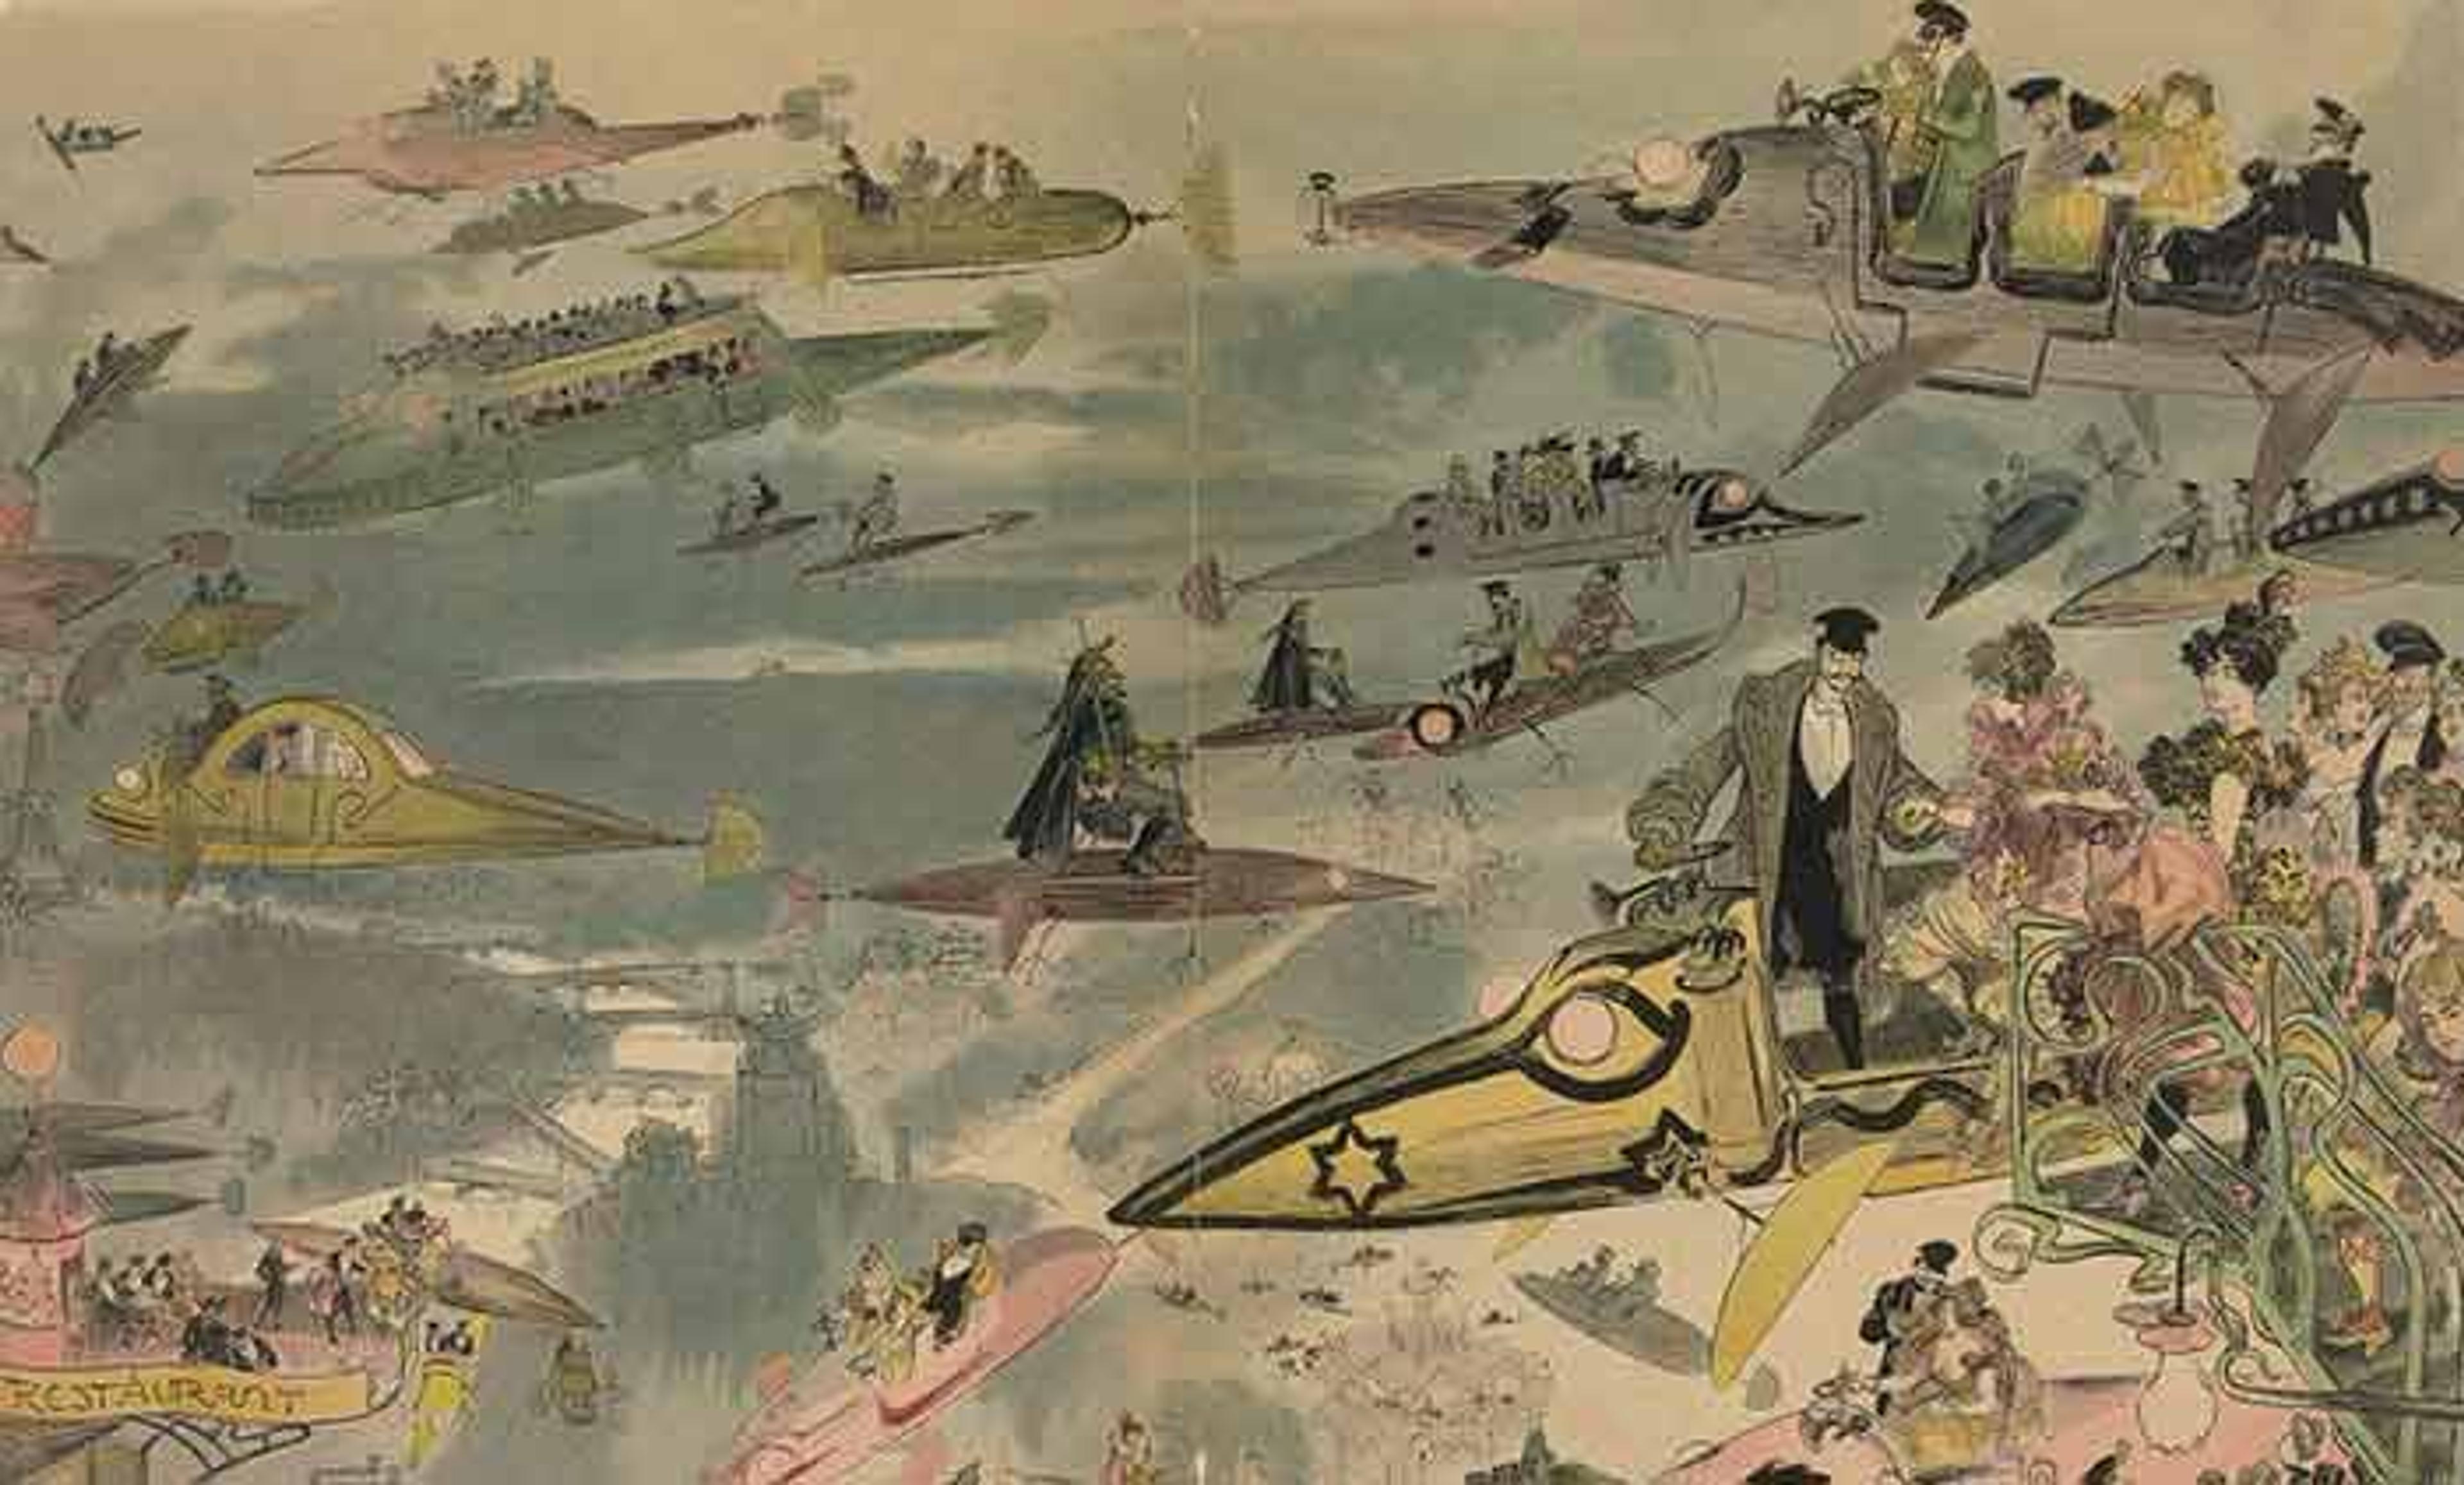 <p><em>Le Sortie de l’opéra</em>. Air travel over Paris in 2000, as imagined in the late 1800s. <em>Courtesy the Library of Congress</em></p>